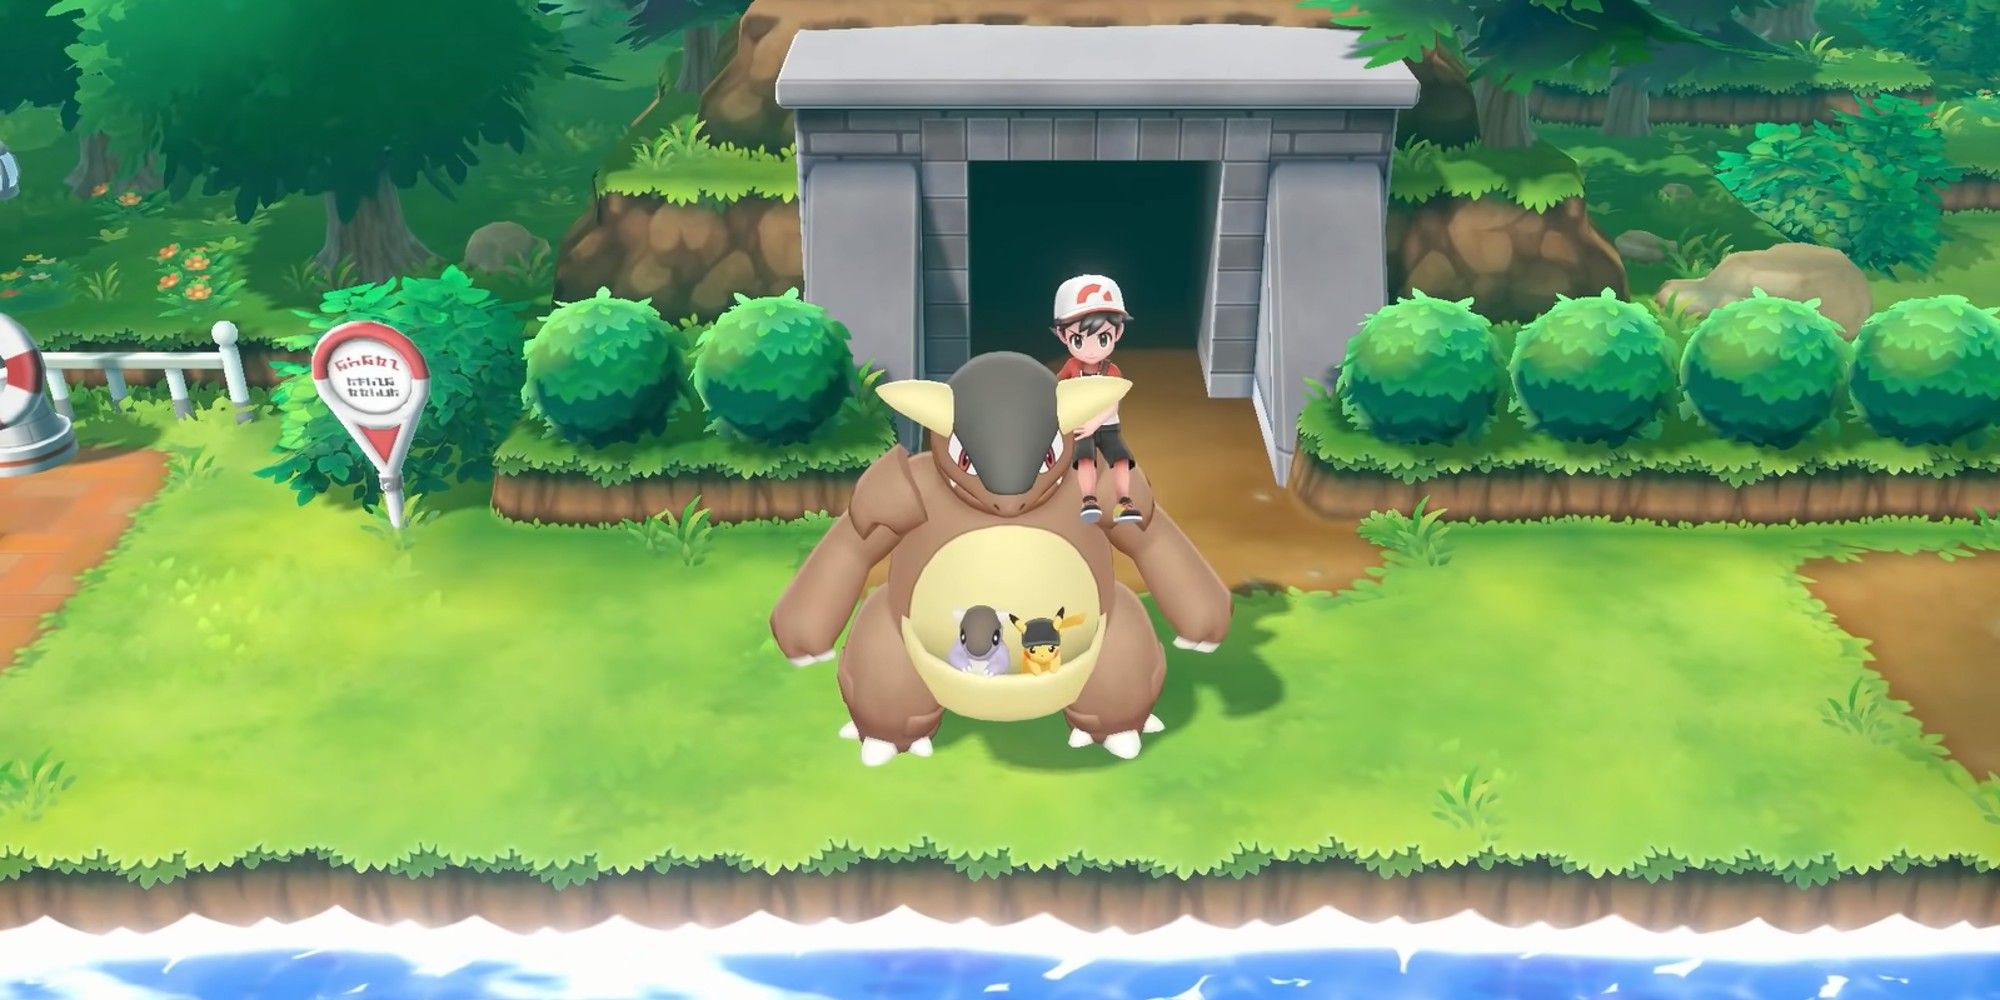 Kangaskhan from Pokemon Let's Go Eevee & Let's Go Pikachu standing still and looking at the camera